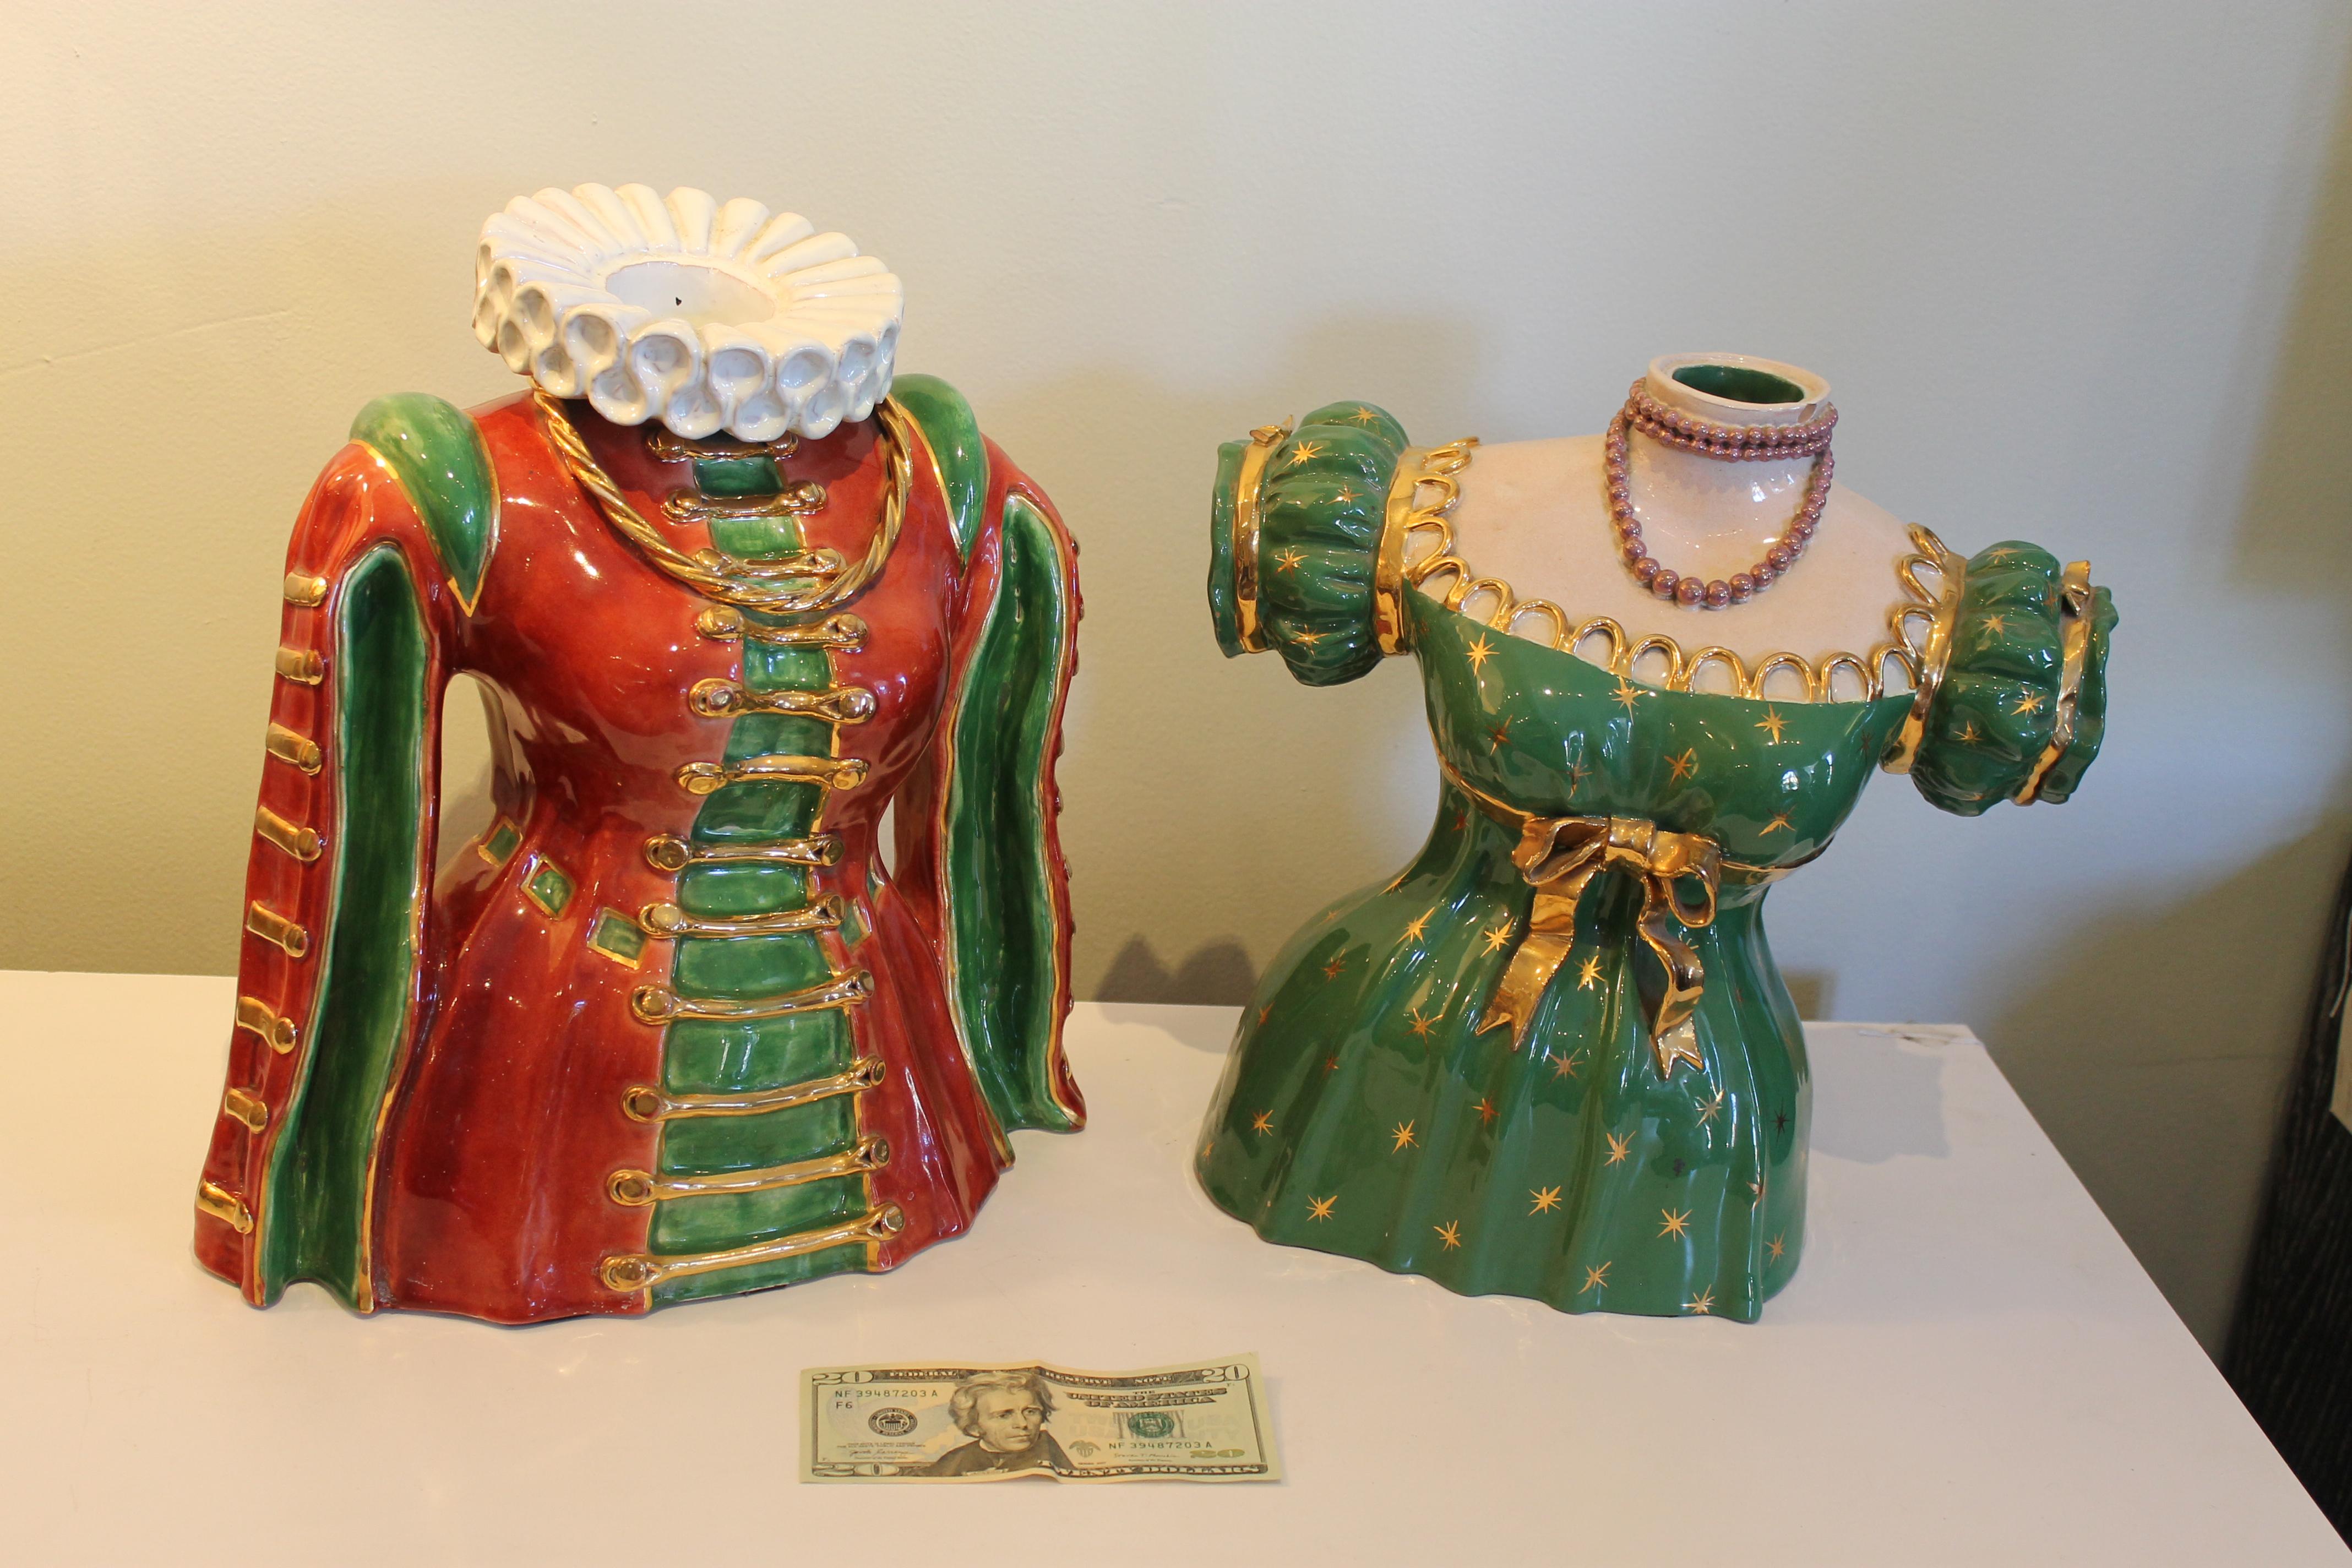 Large and bizarre pair of glazed terracotta vases, surrealist dress forms with Elizabethan costume. The larger of the two, with the ruffled collar, is 14